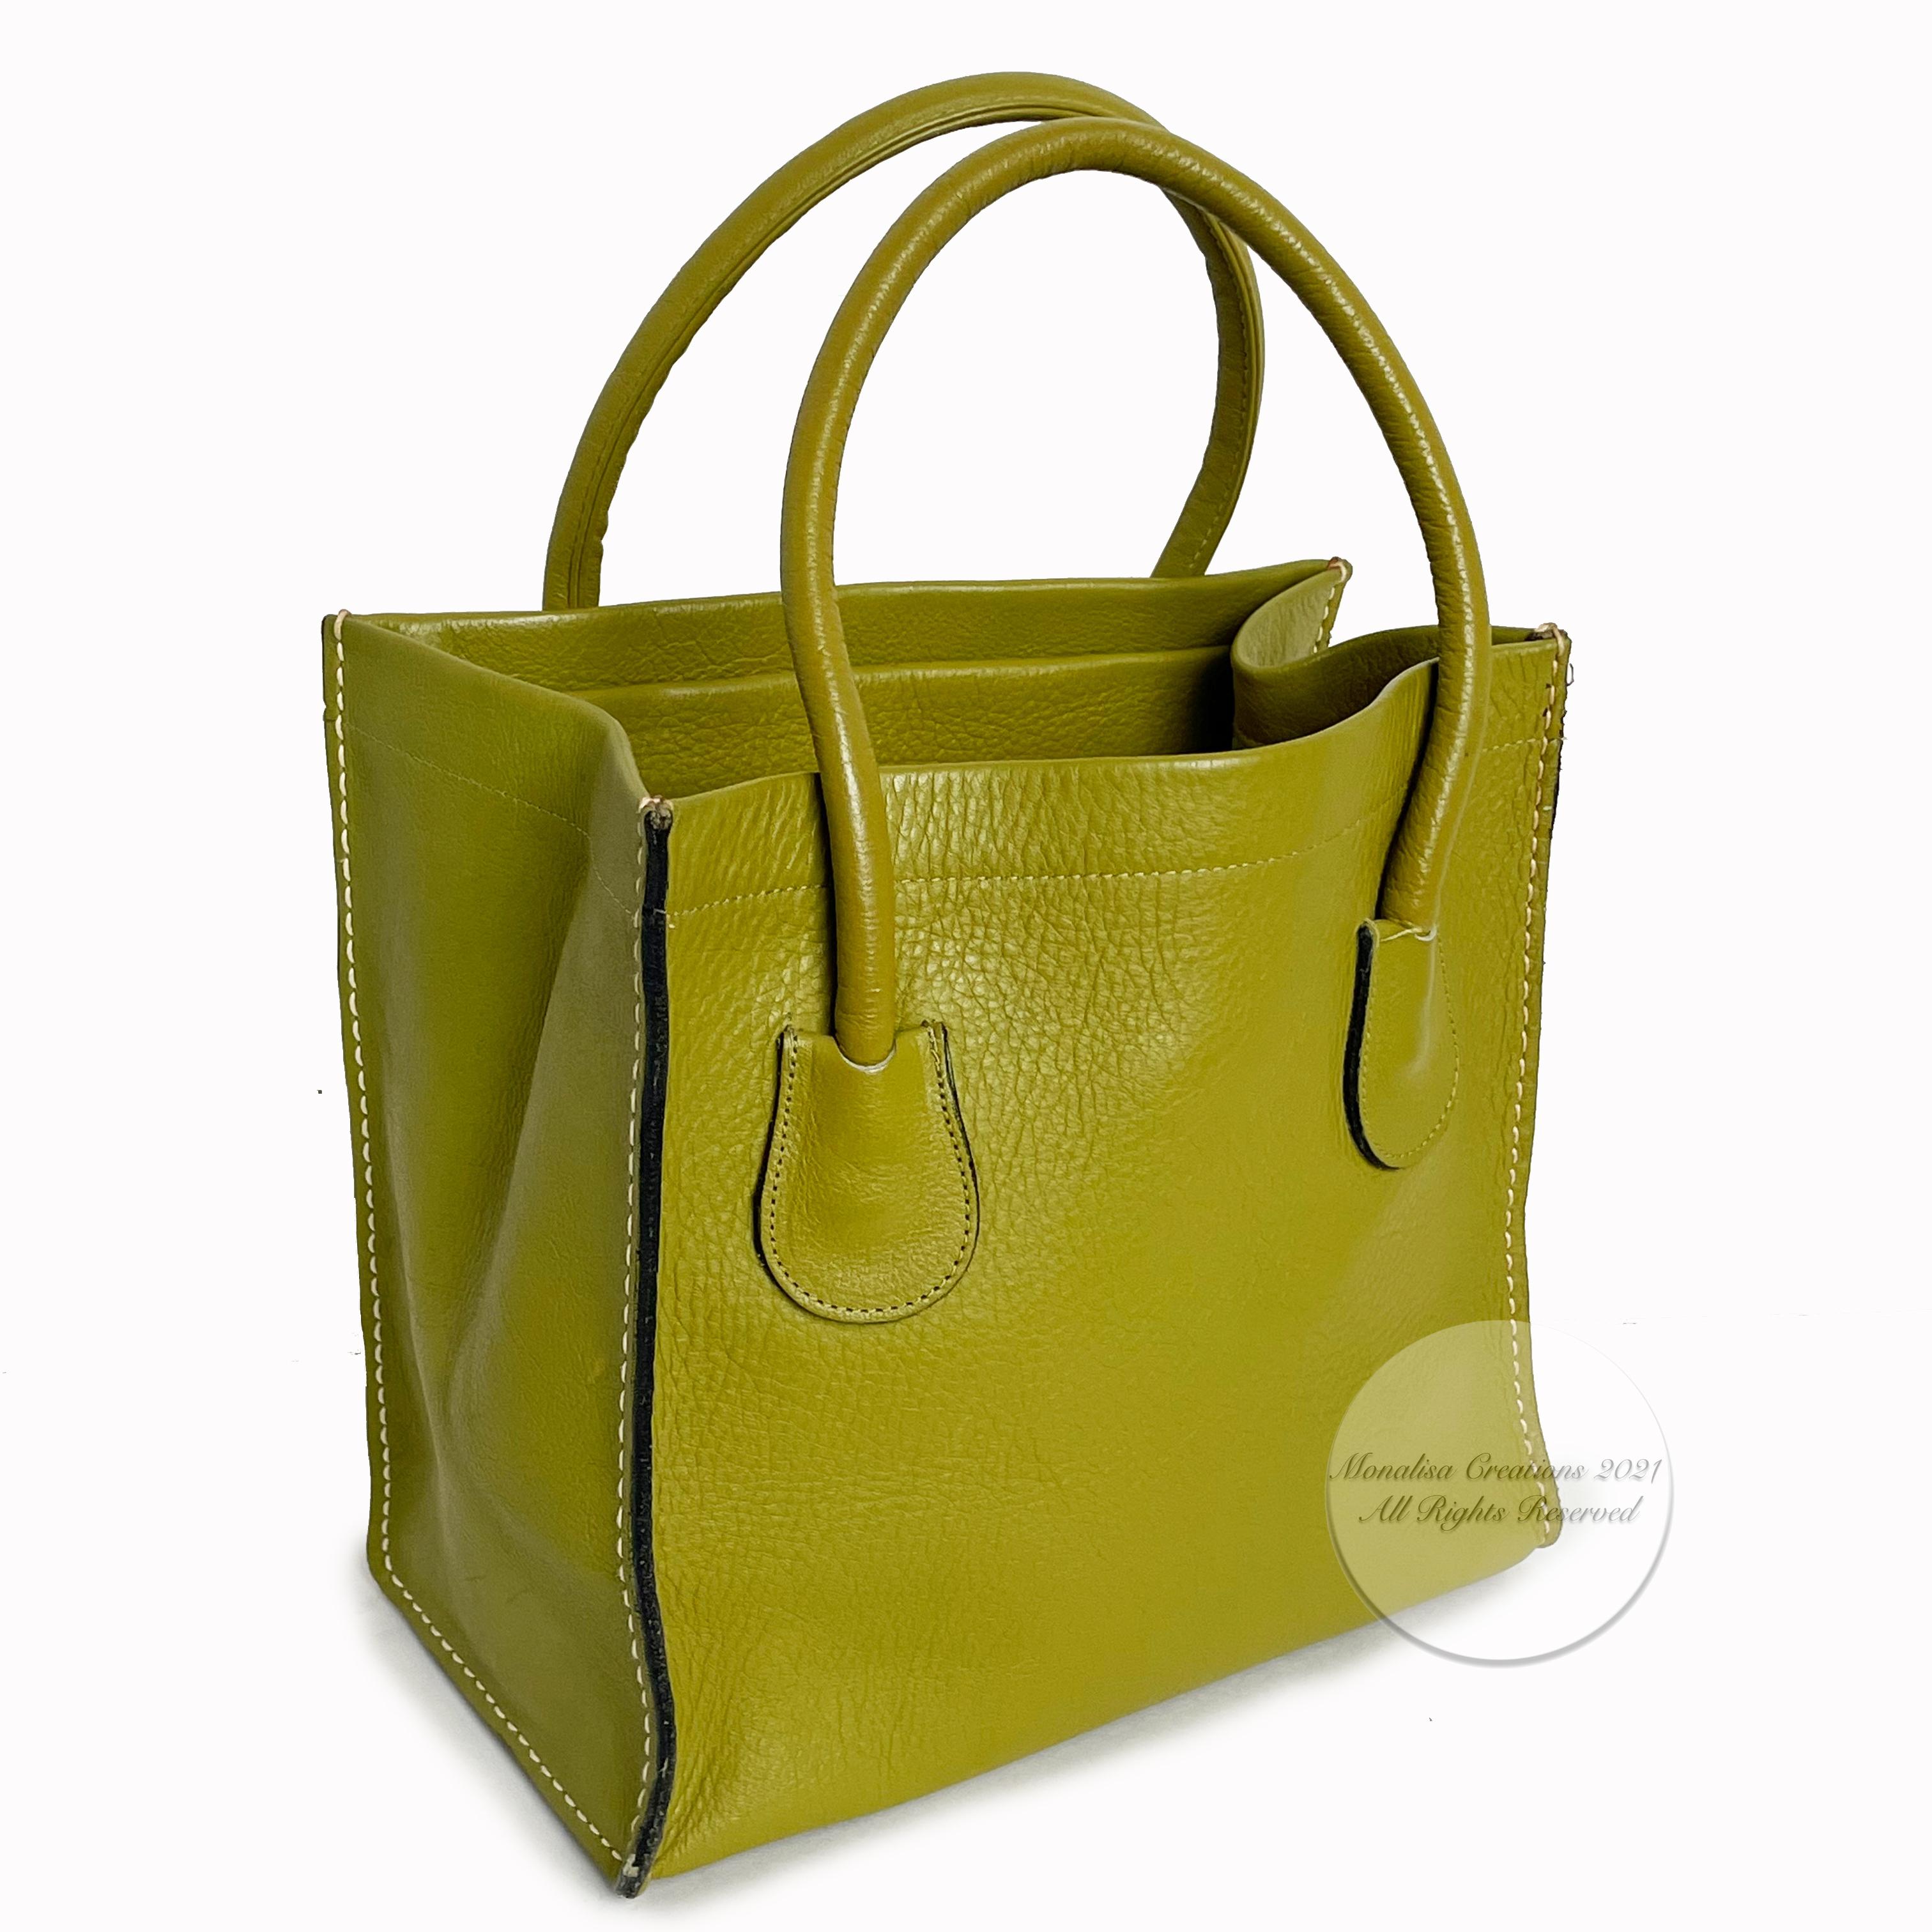 Authentic, preowned, vintage Bonnie Cashin for Coach Lime Green Leather Tote Bag, from the 60s. Partially-lined in canvas with one interior toggle pocket. Bottom has cardboard to keep shape (not sure if this is original). Tagged with both black